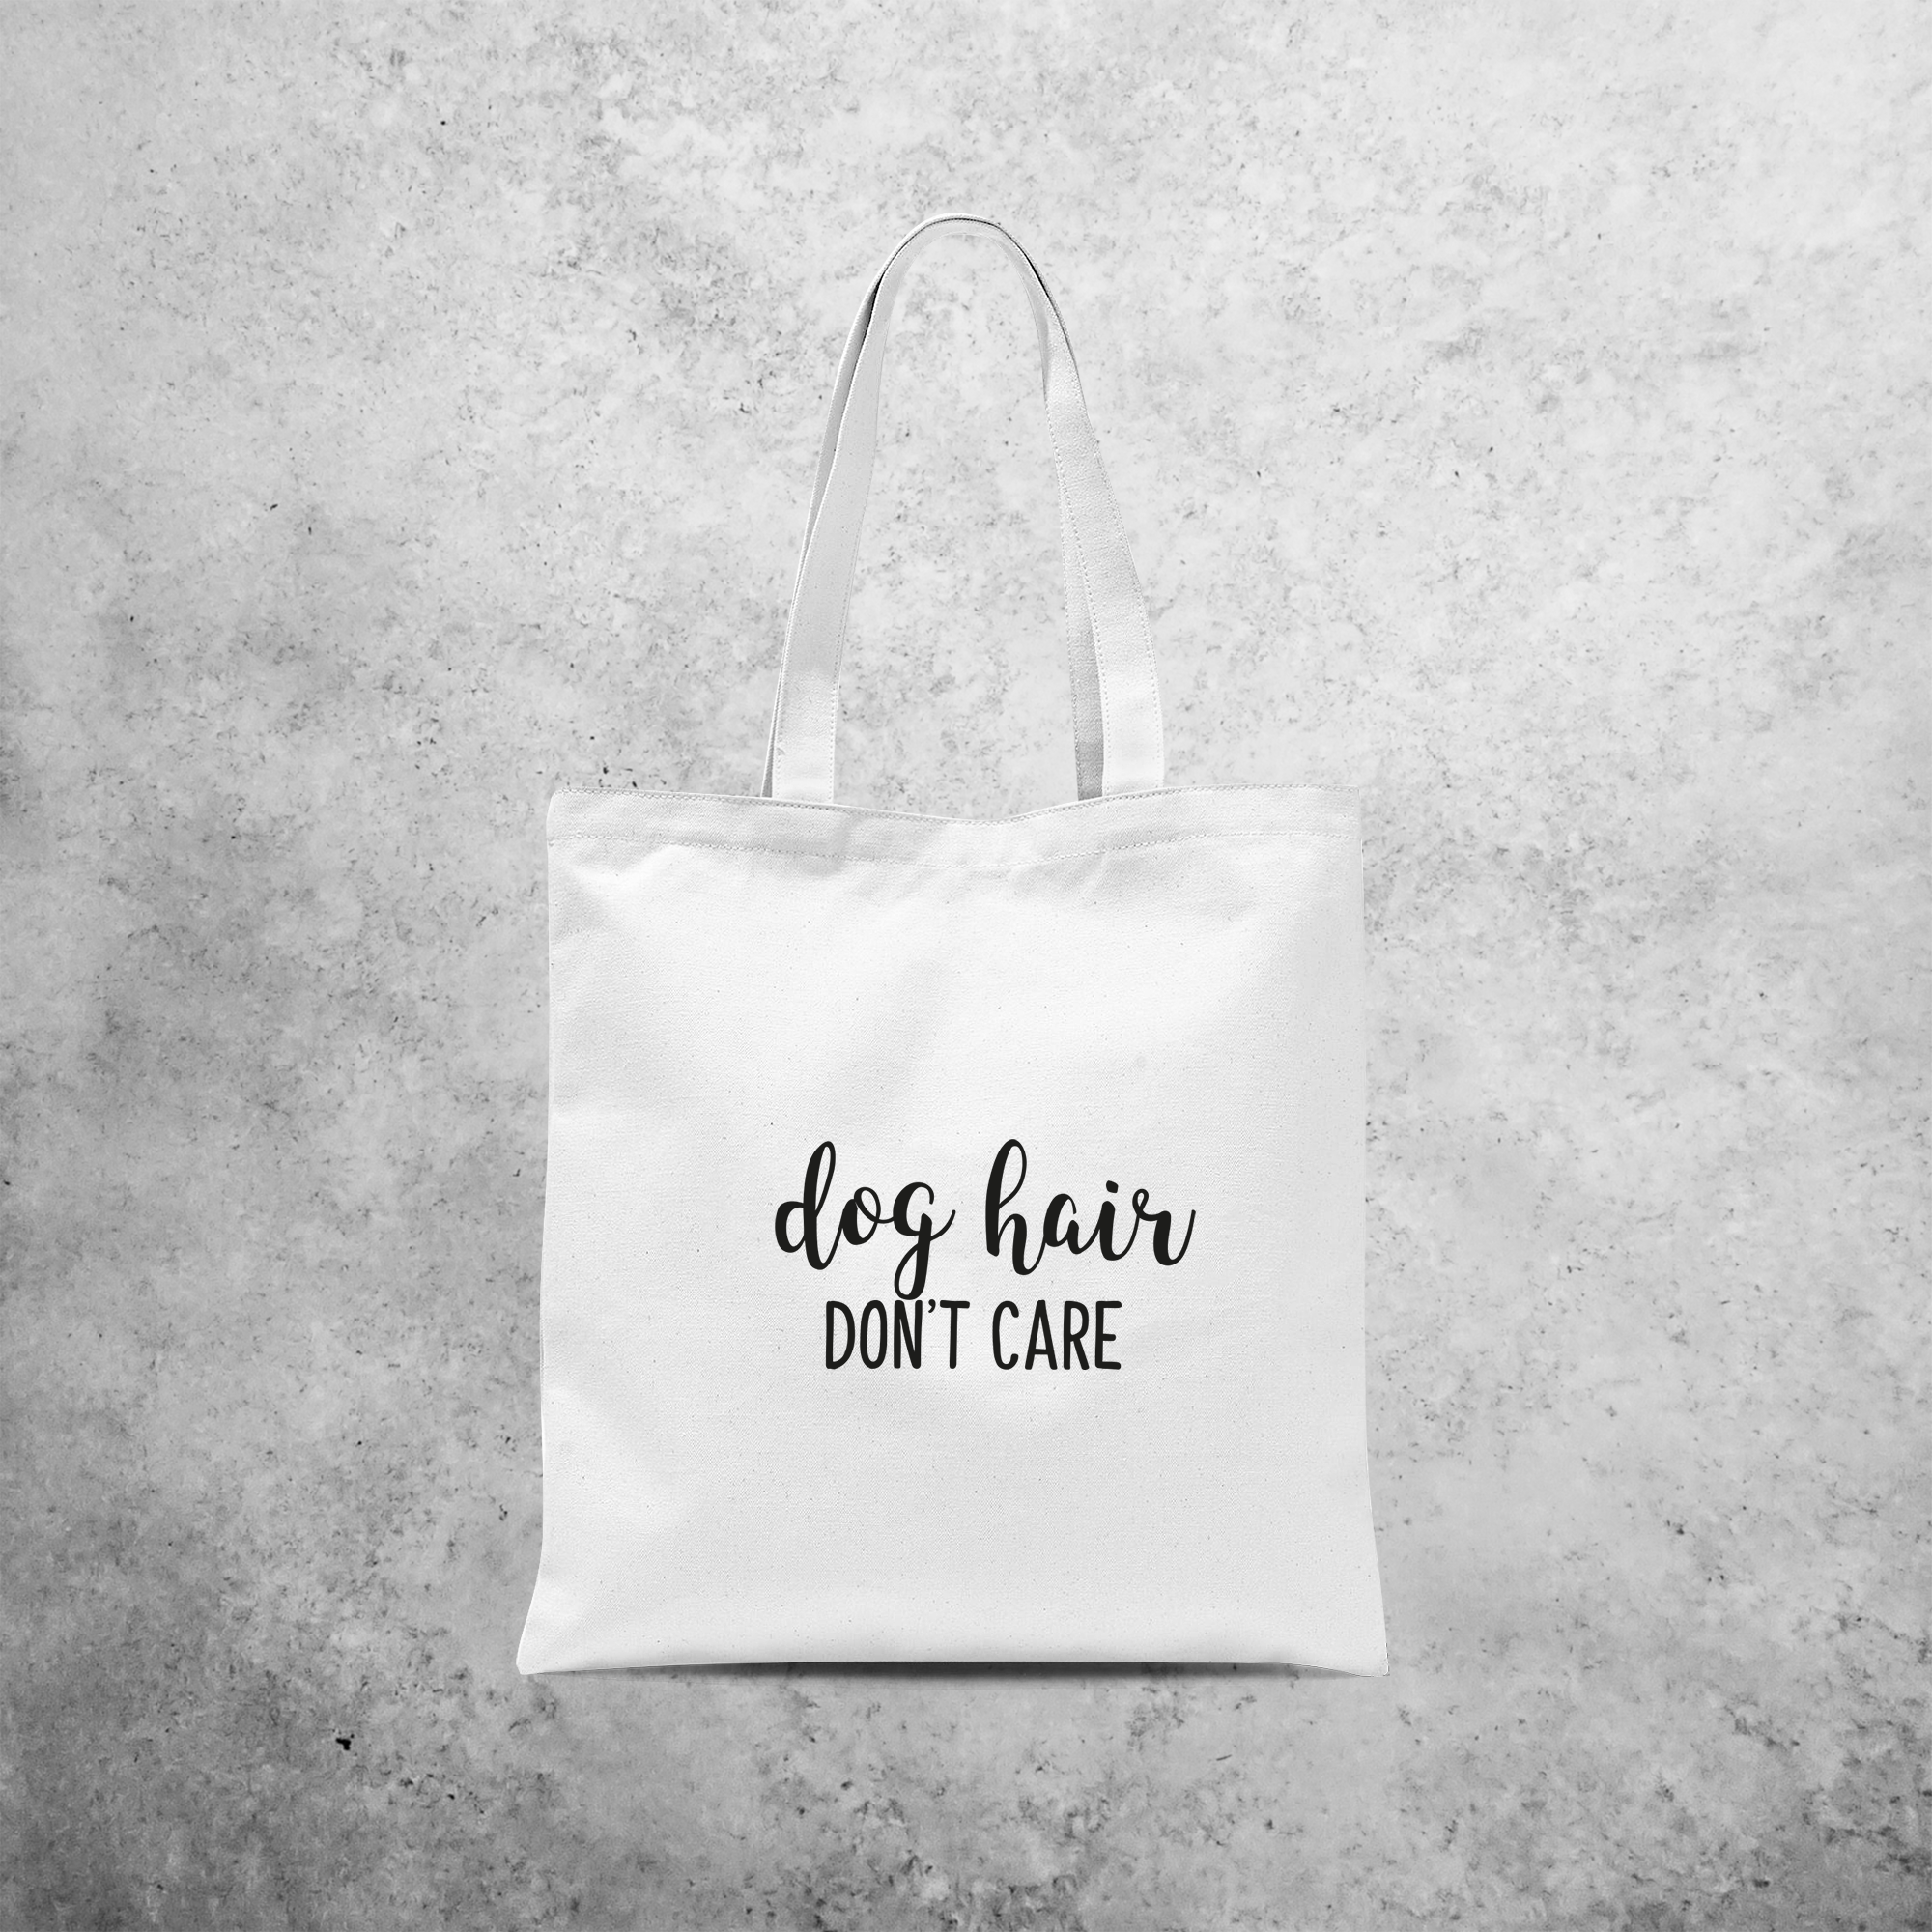 'Dog hair don't care' tote bag